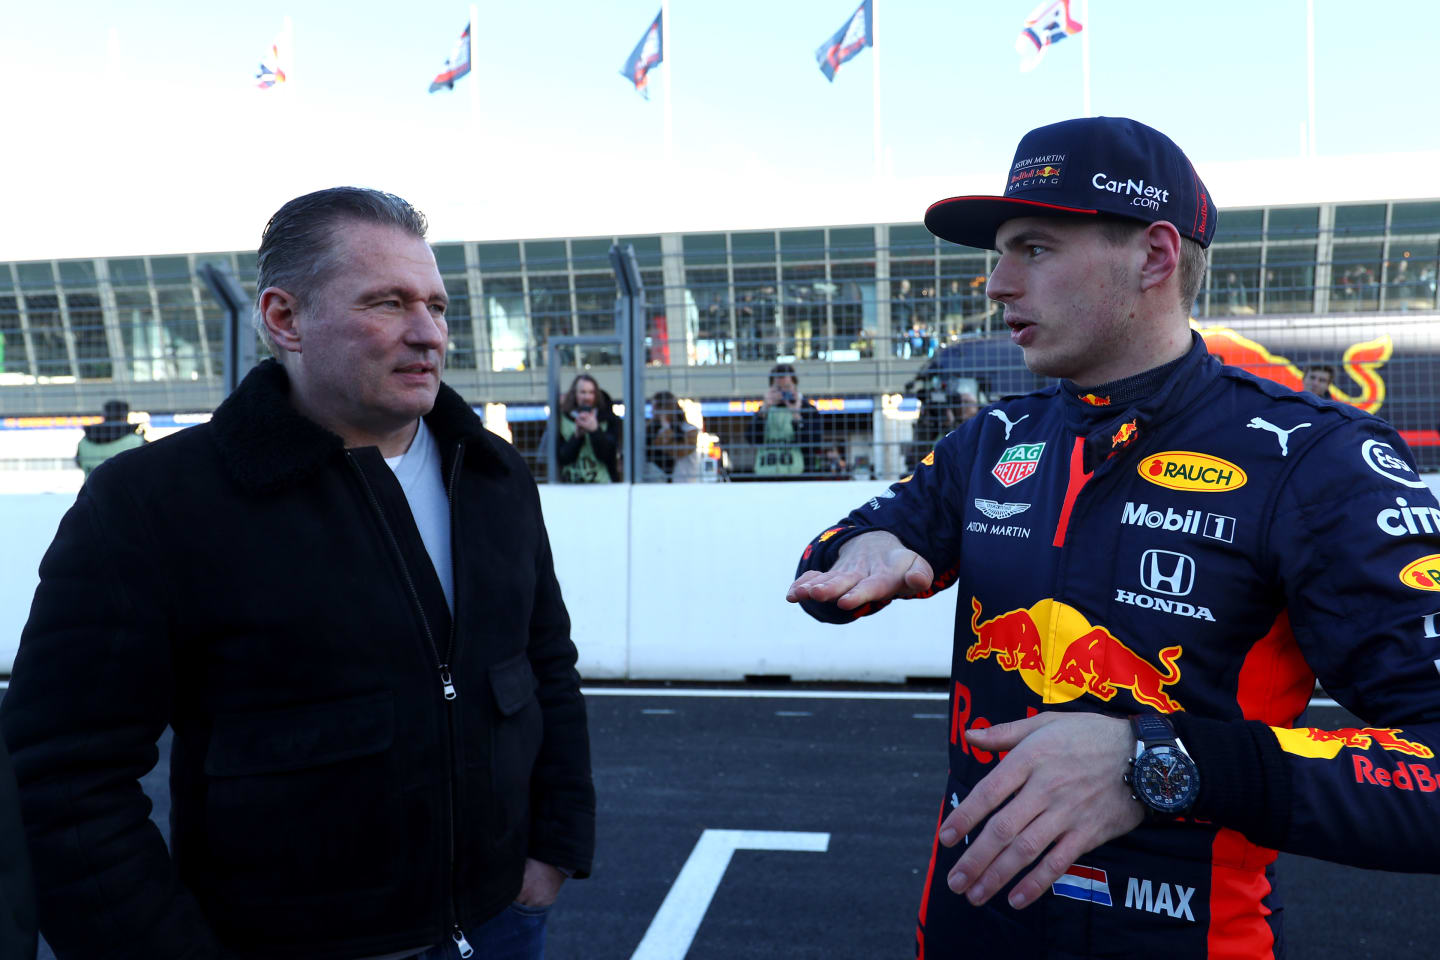 ZANDVOORT, NETHERLANDS - MARCH 04:  Max Verstappen of Red Bull Racing is pictured speaking to his